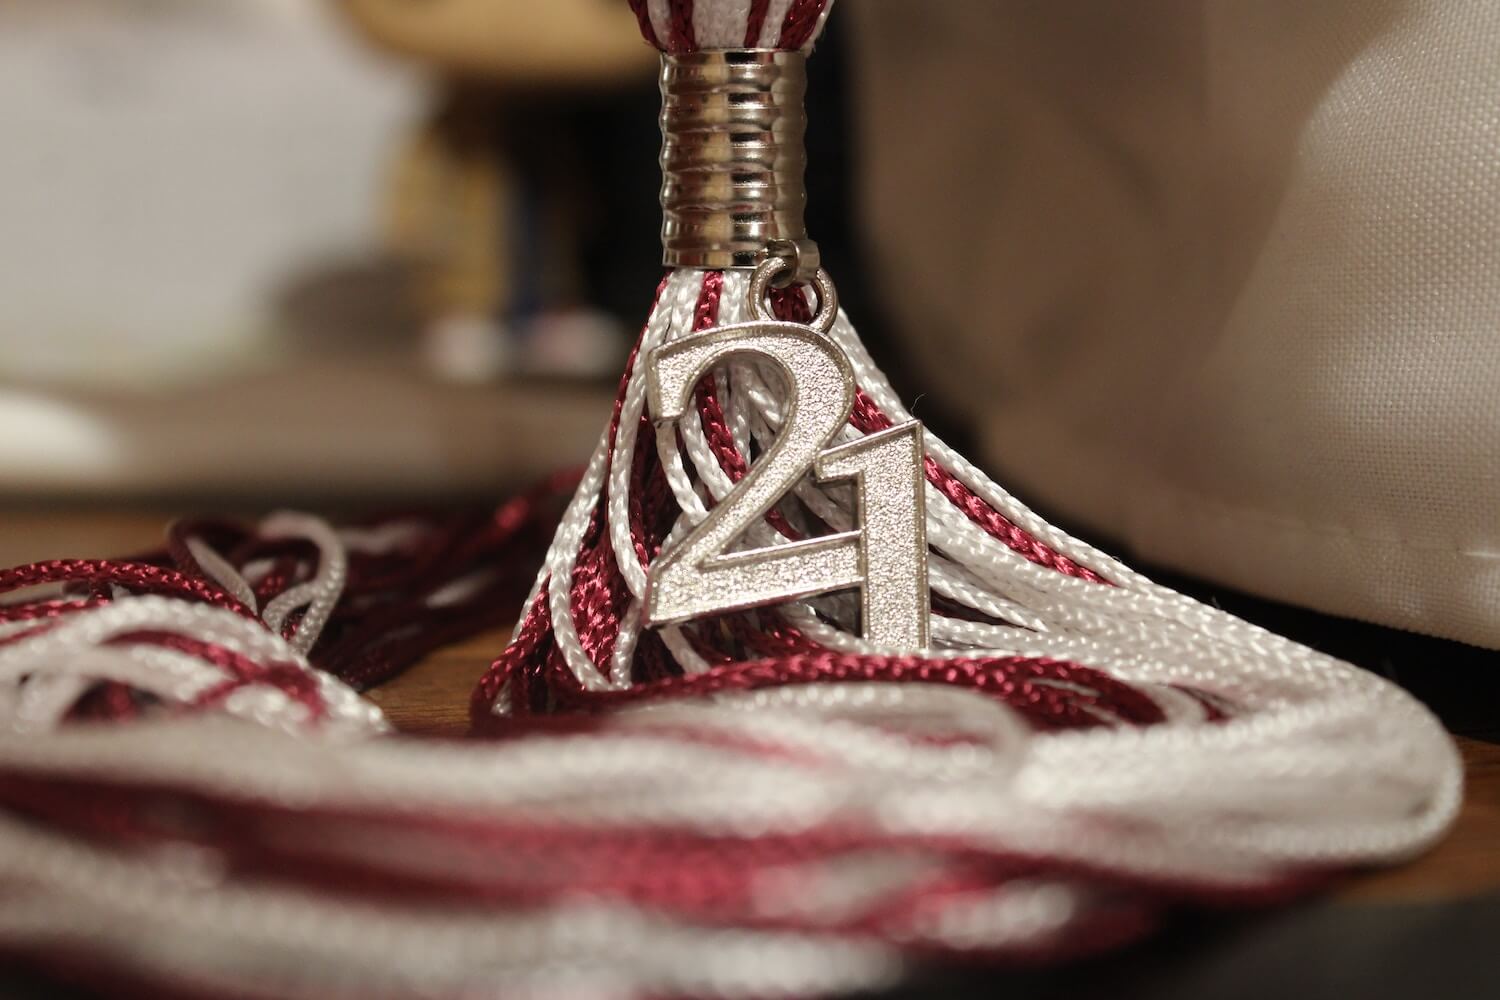 Closeup of a a graduation tassel with the number "21" attached to it.